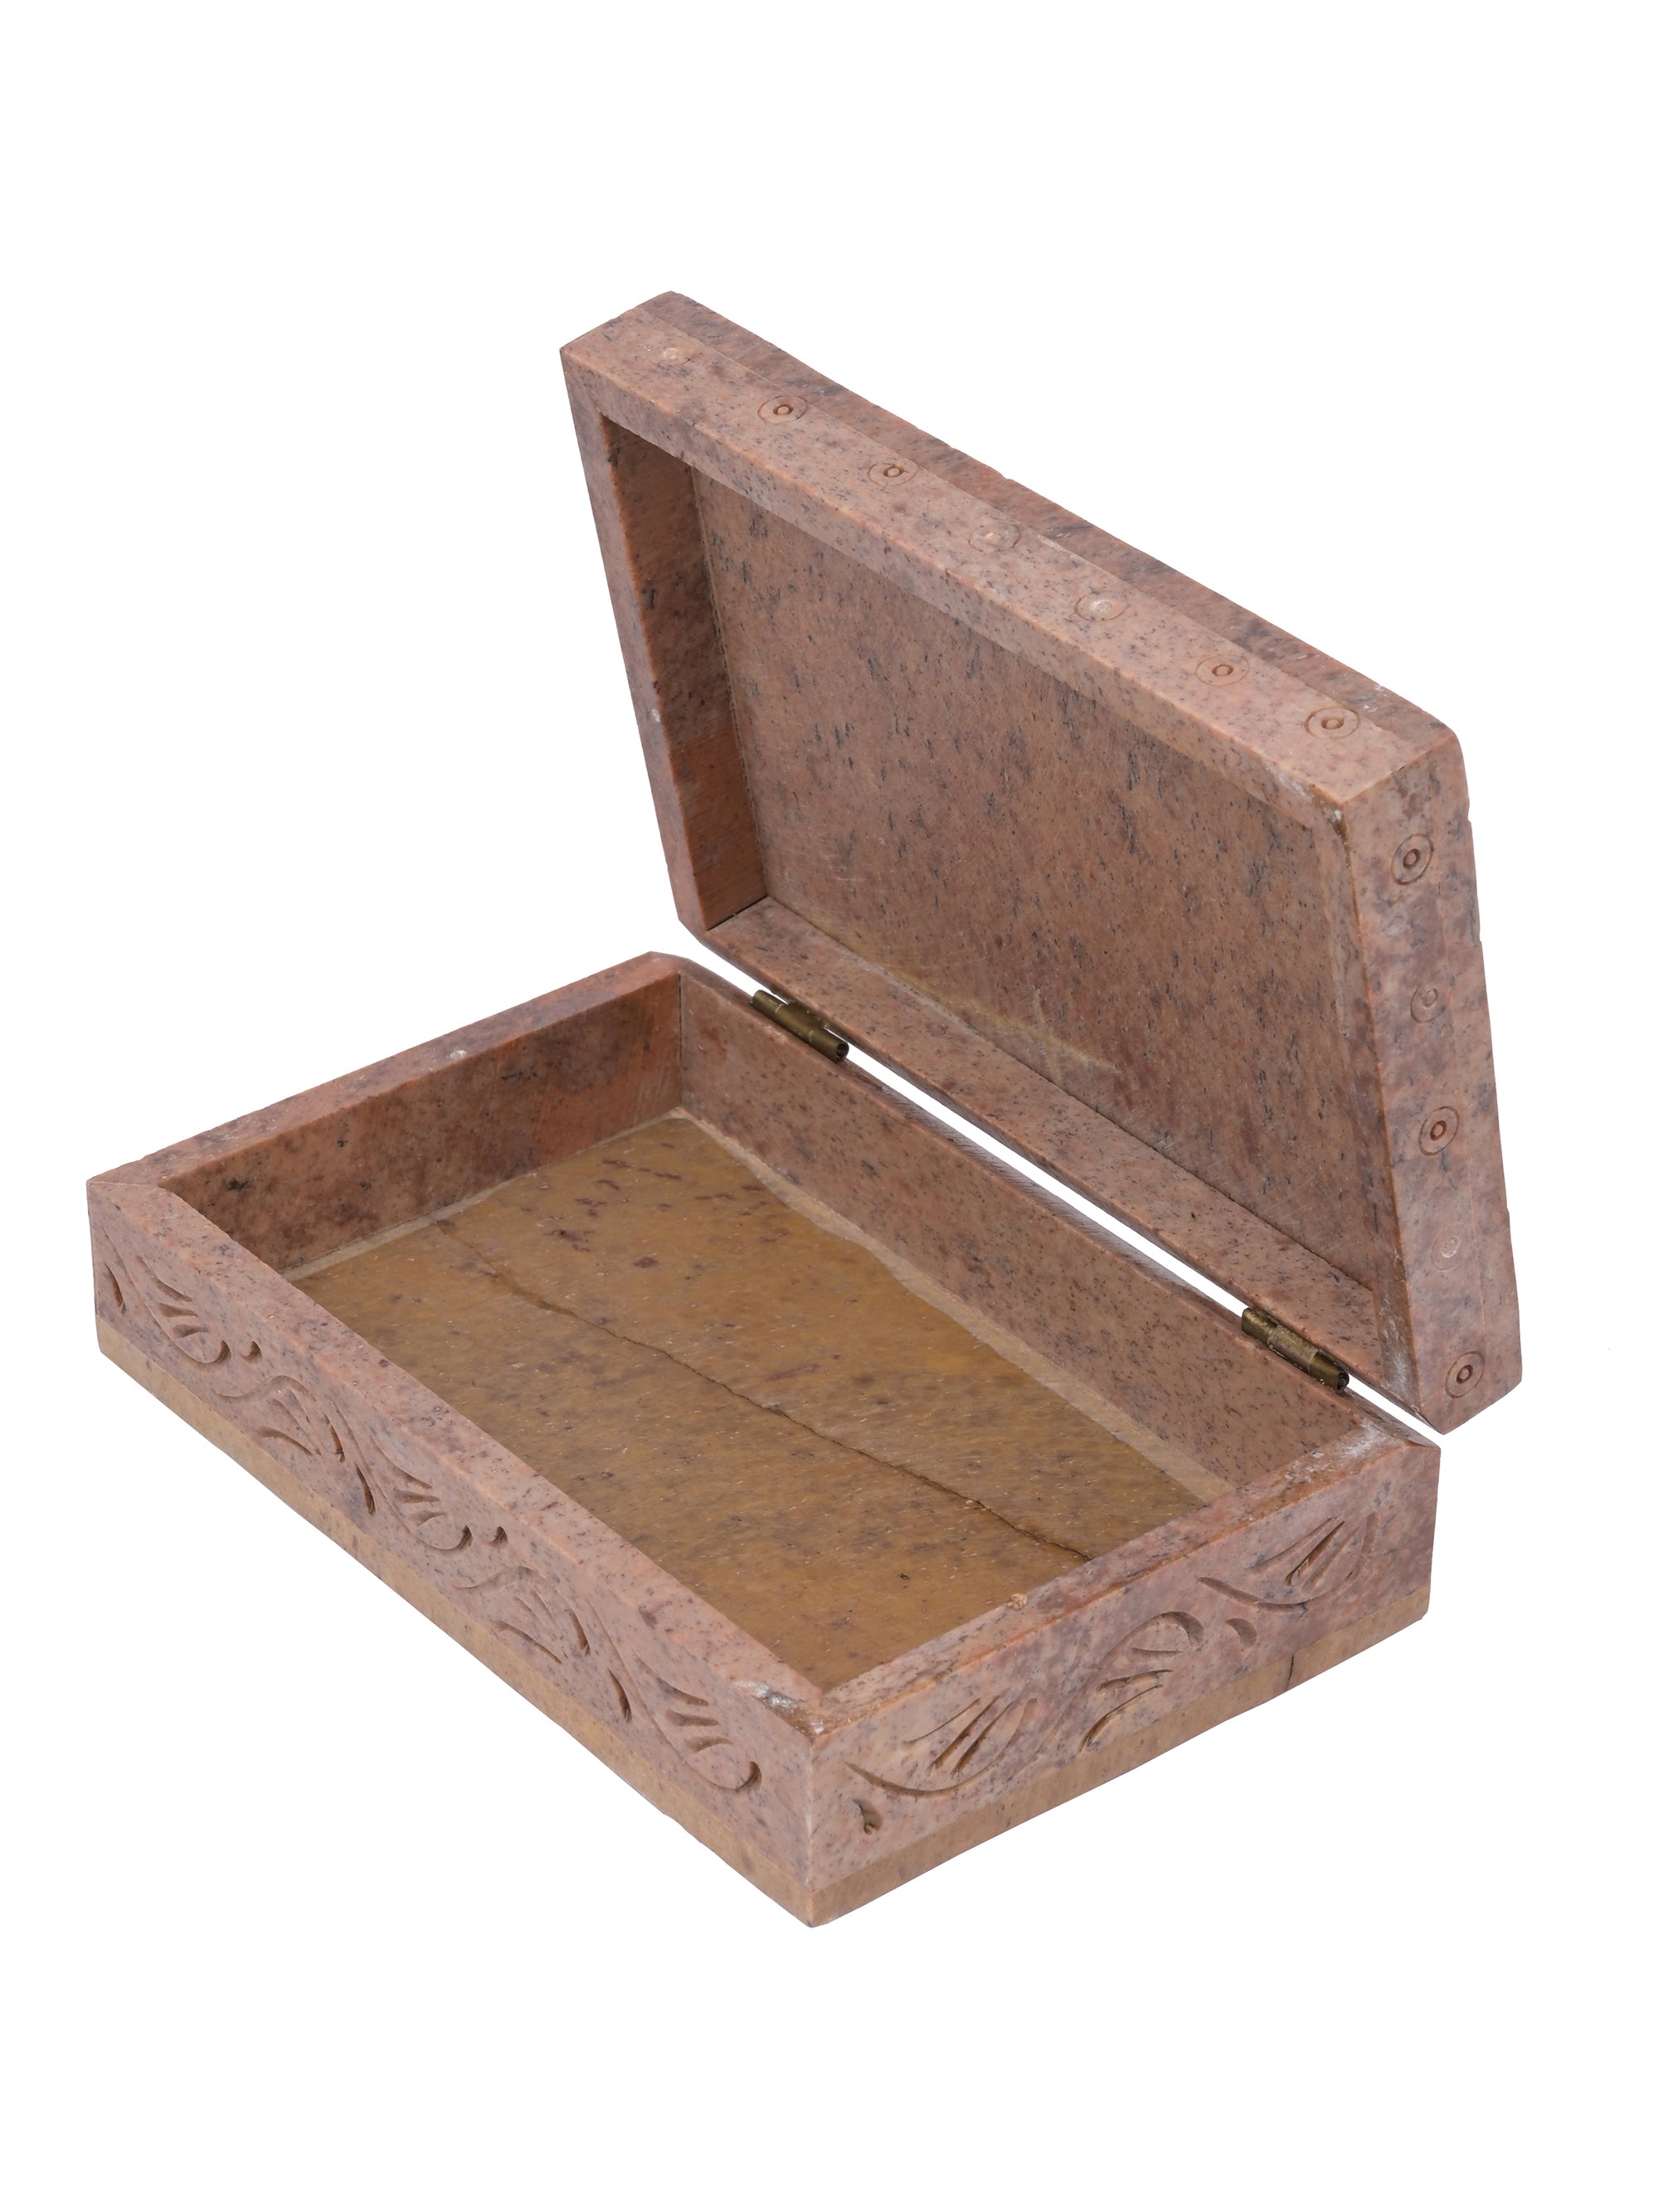 Medium size Jewellery / Storage box handcrafted from soapstone - The Heritage Artifacts